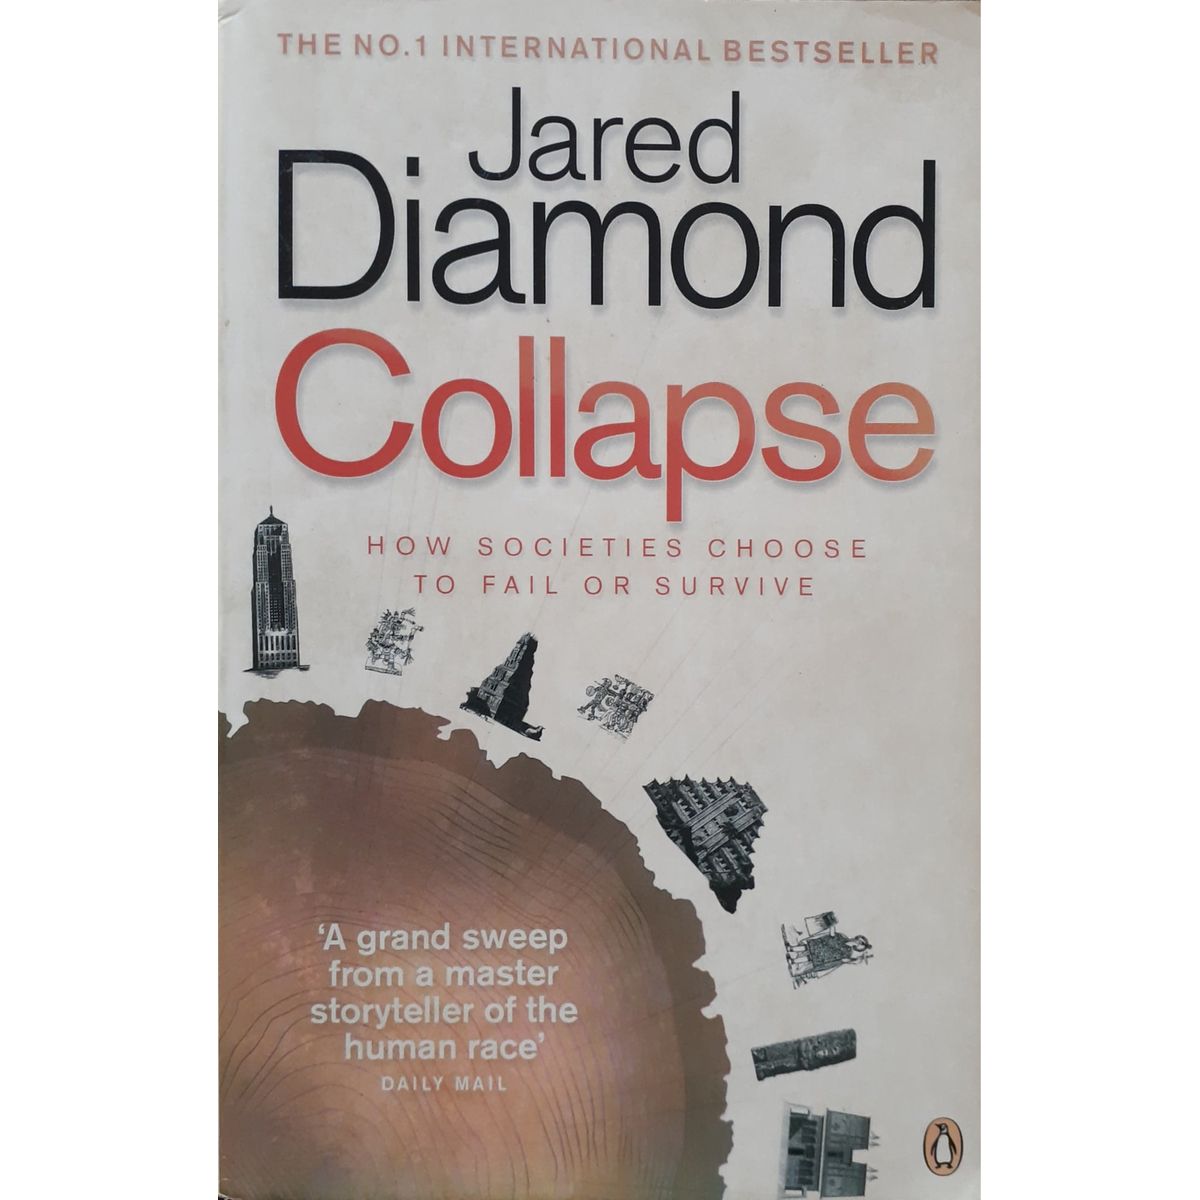 ISBN: 9780140279511 / 0140279512 - Collapse: How Societies Choose to Fail or Survive by Jared Diamond [2007]